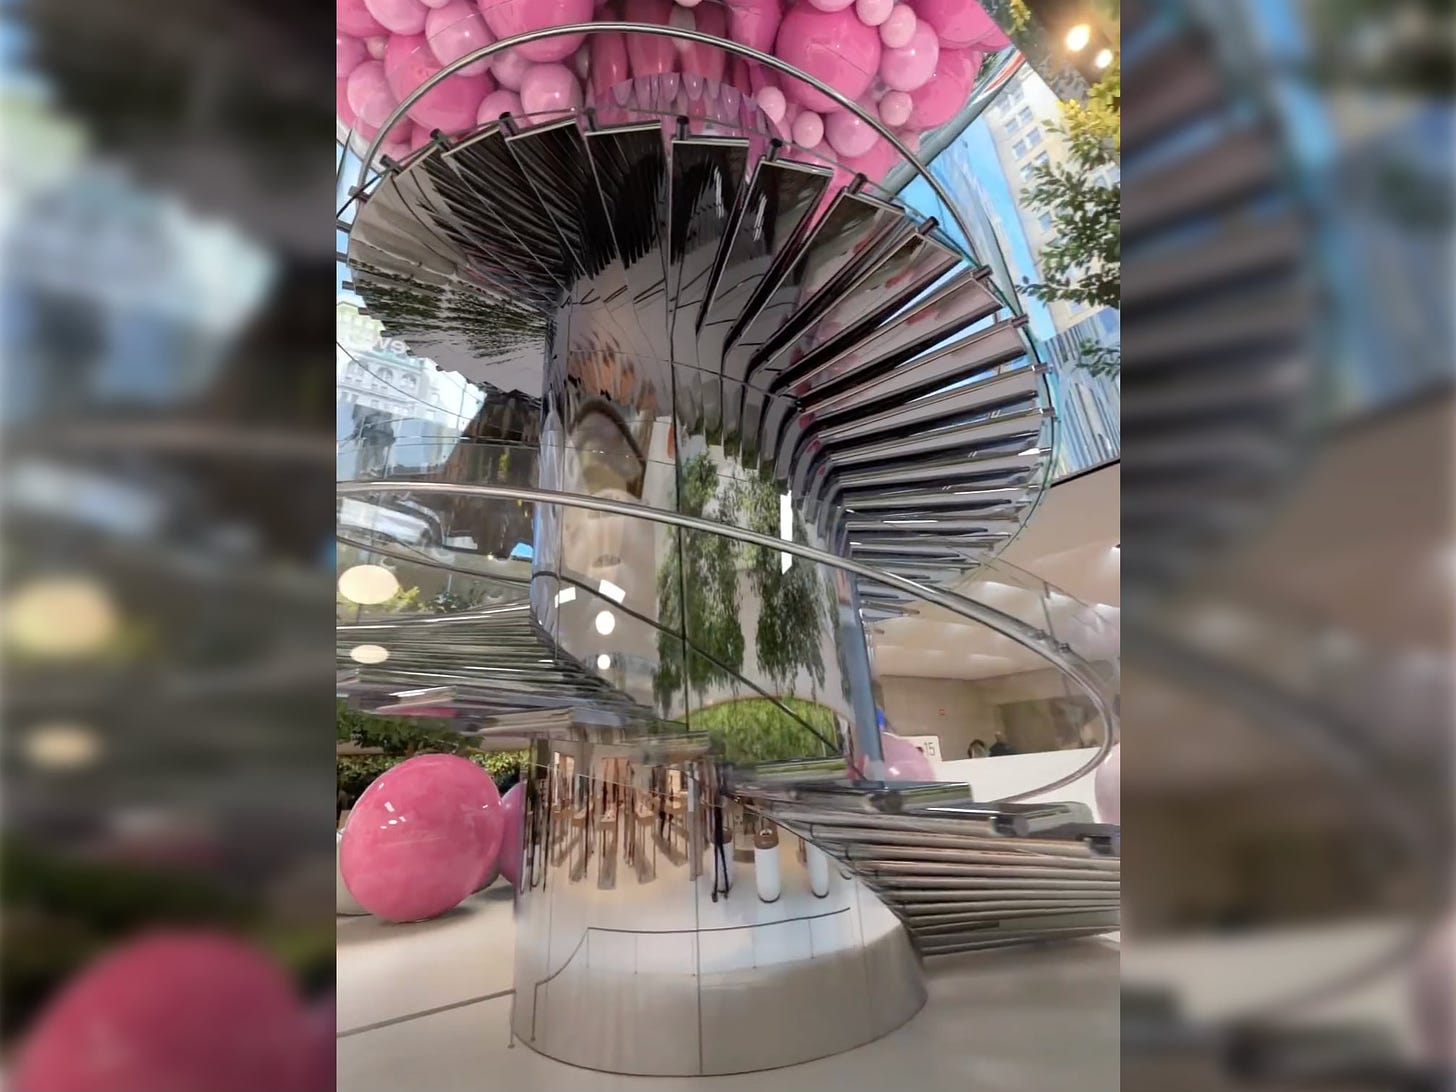 A frame from a CGI clip shot at Apple Fifth Avenue. Pinks bubbles fill the cube and are rolling down the staircase.